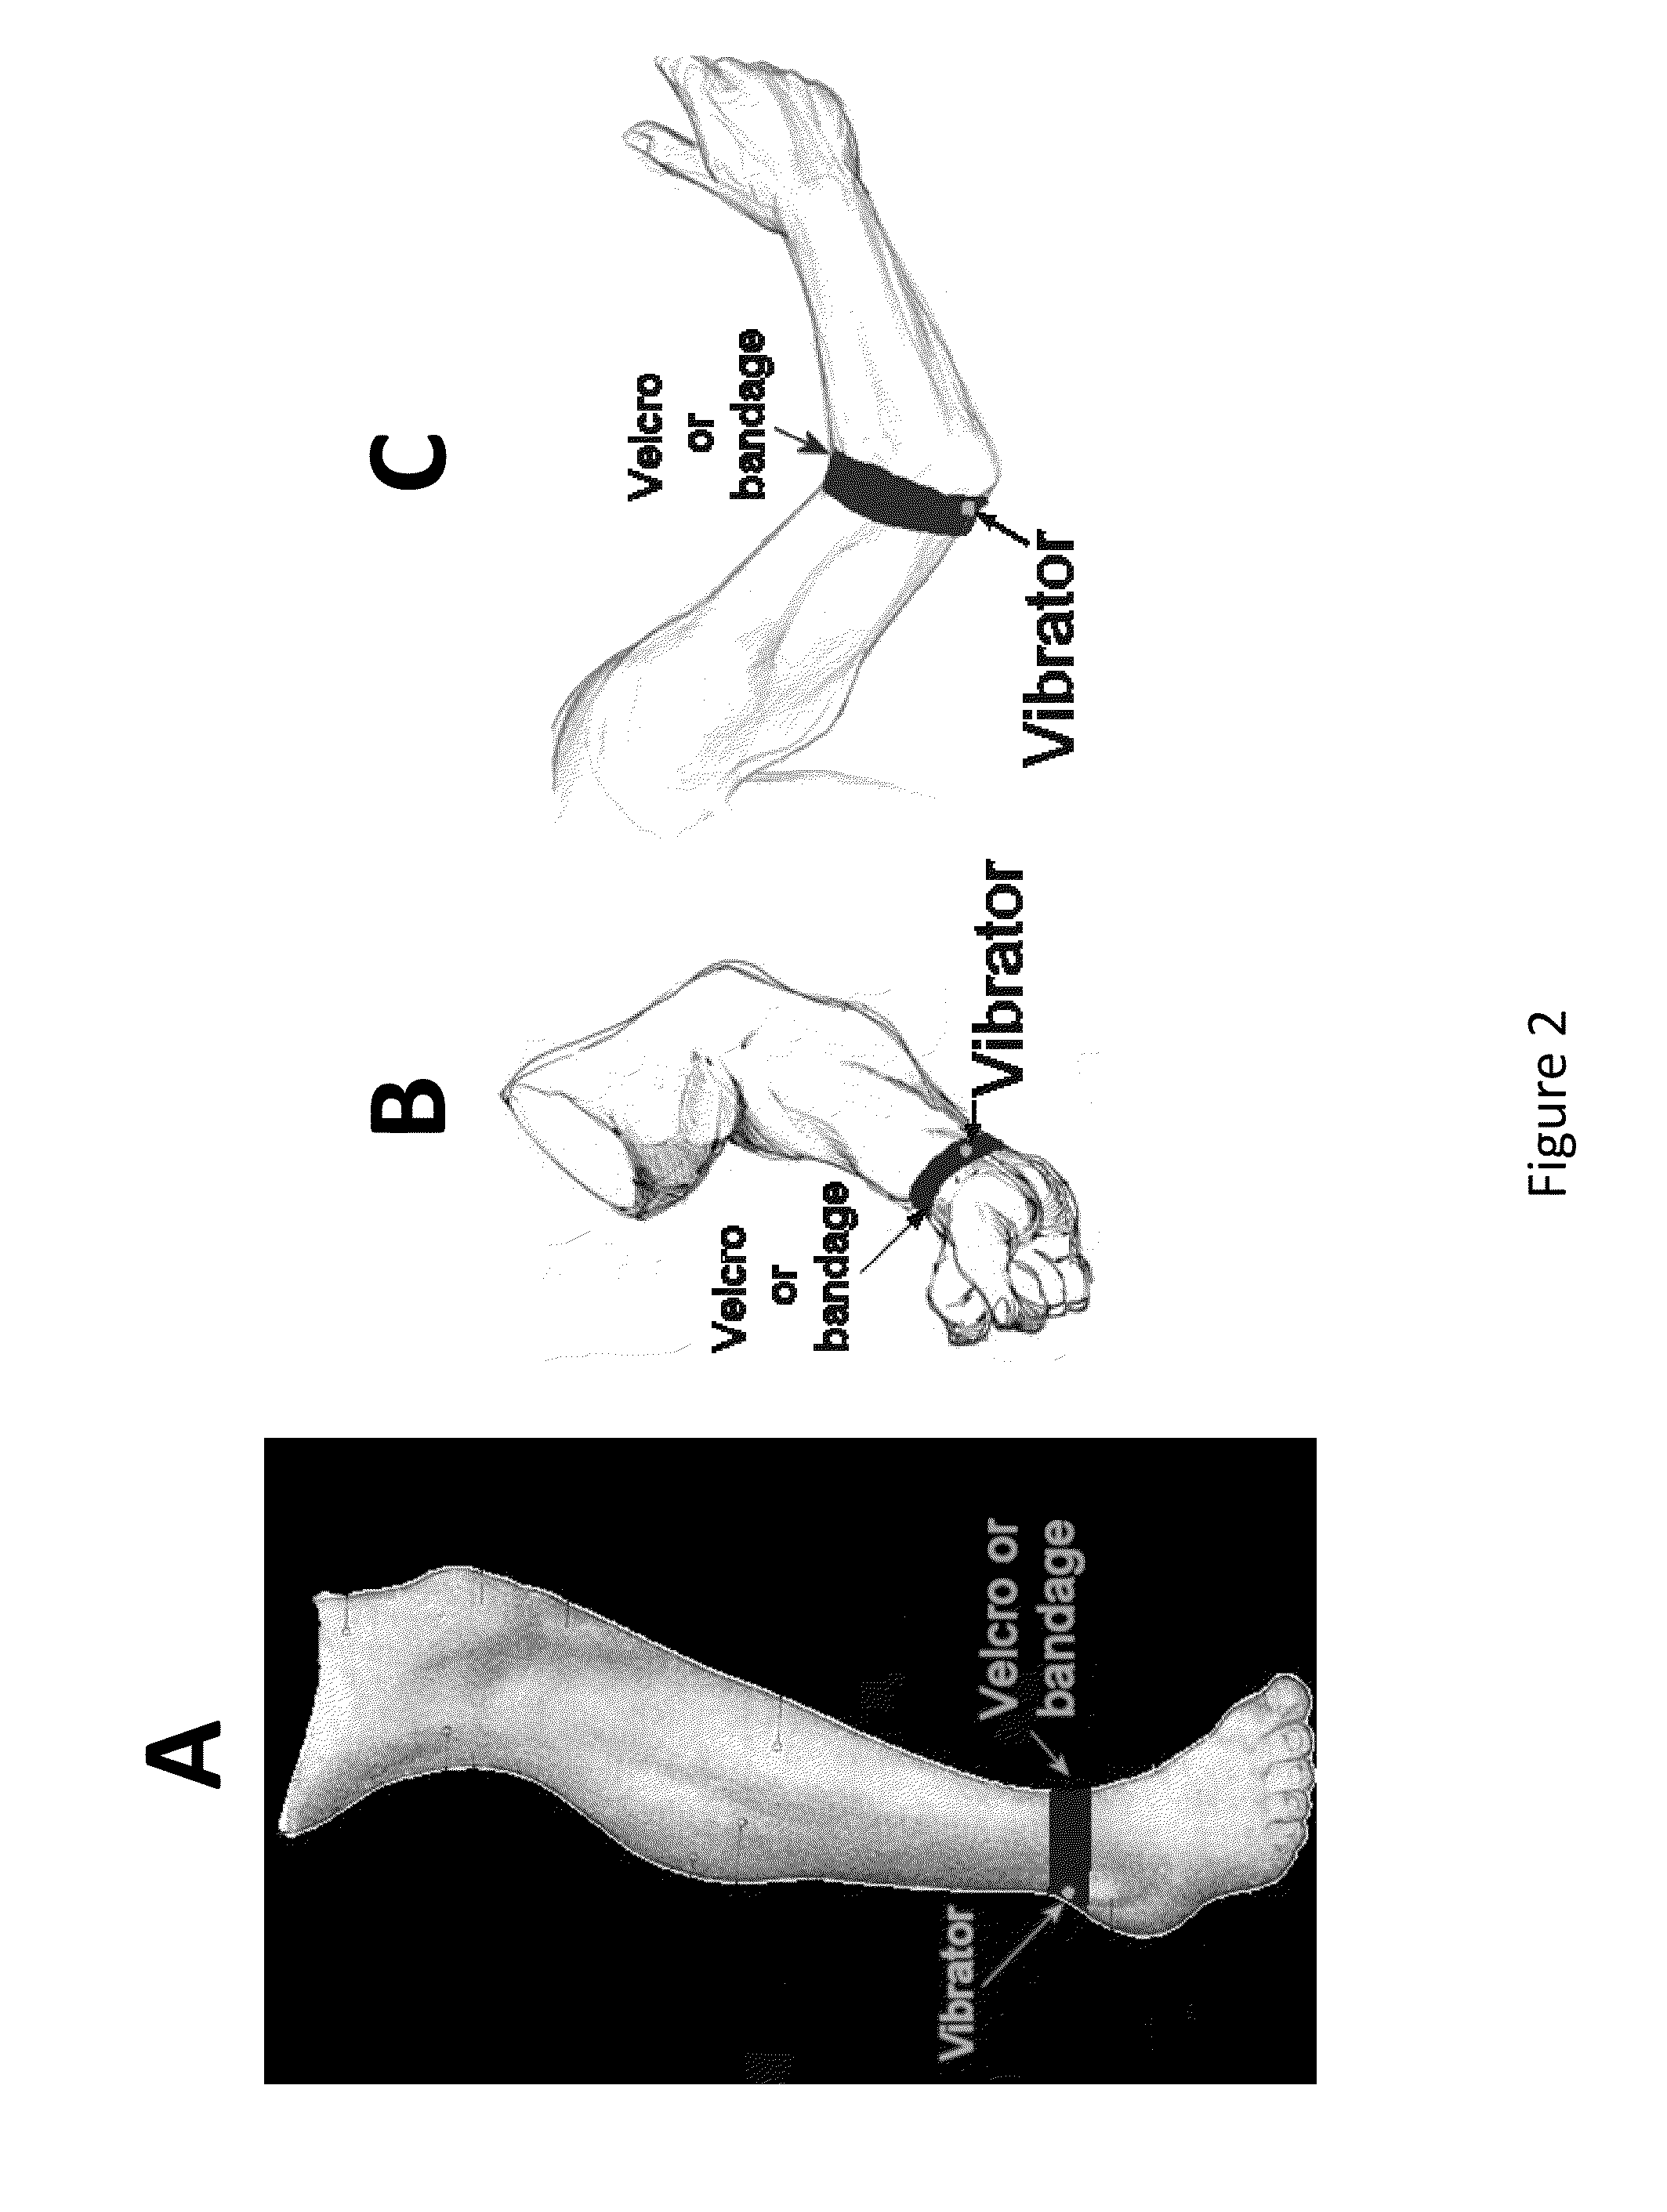 Device, System and Method for Facilitating Breathing Via Simulation of Limb Movement